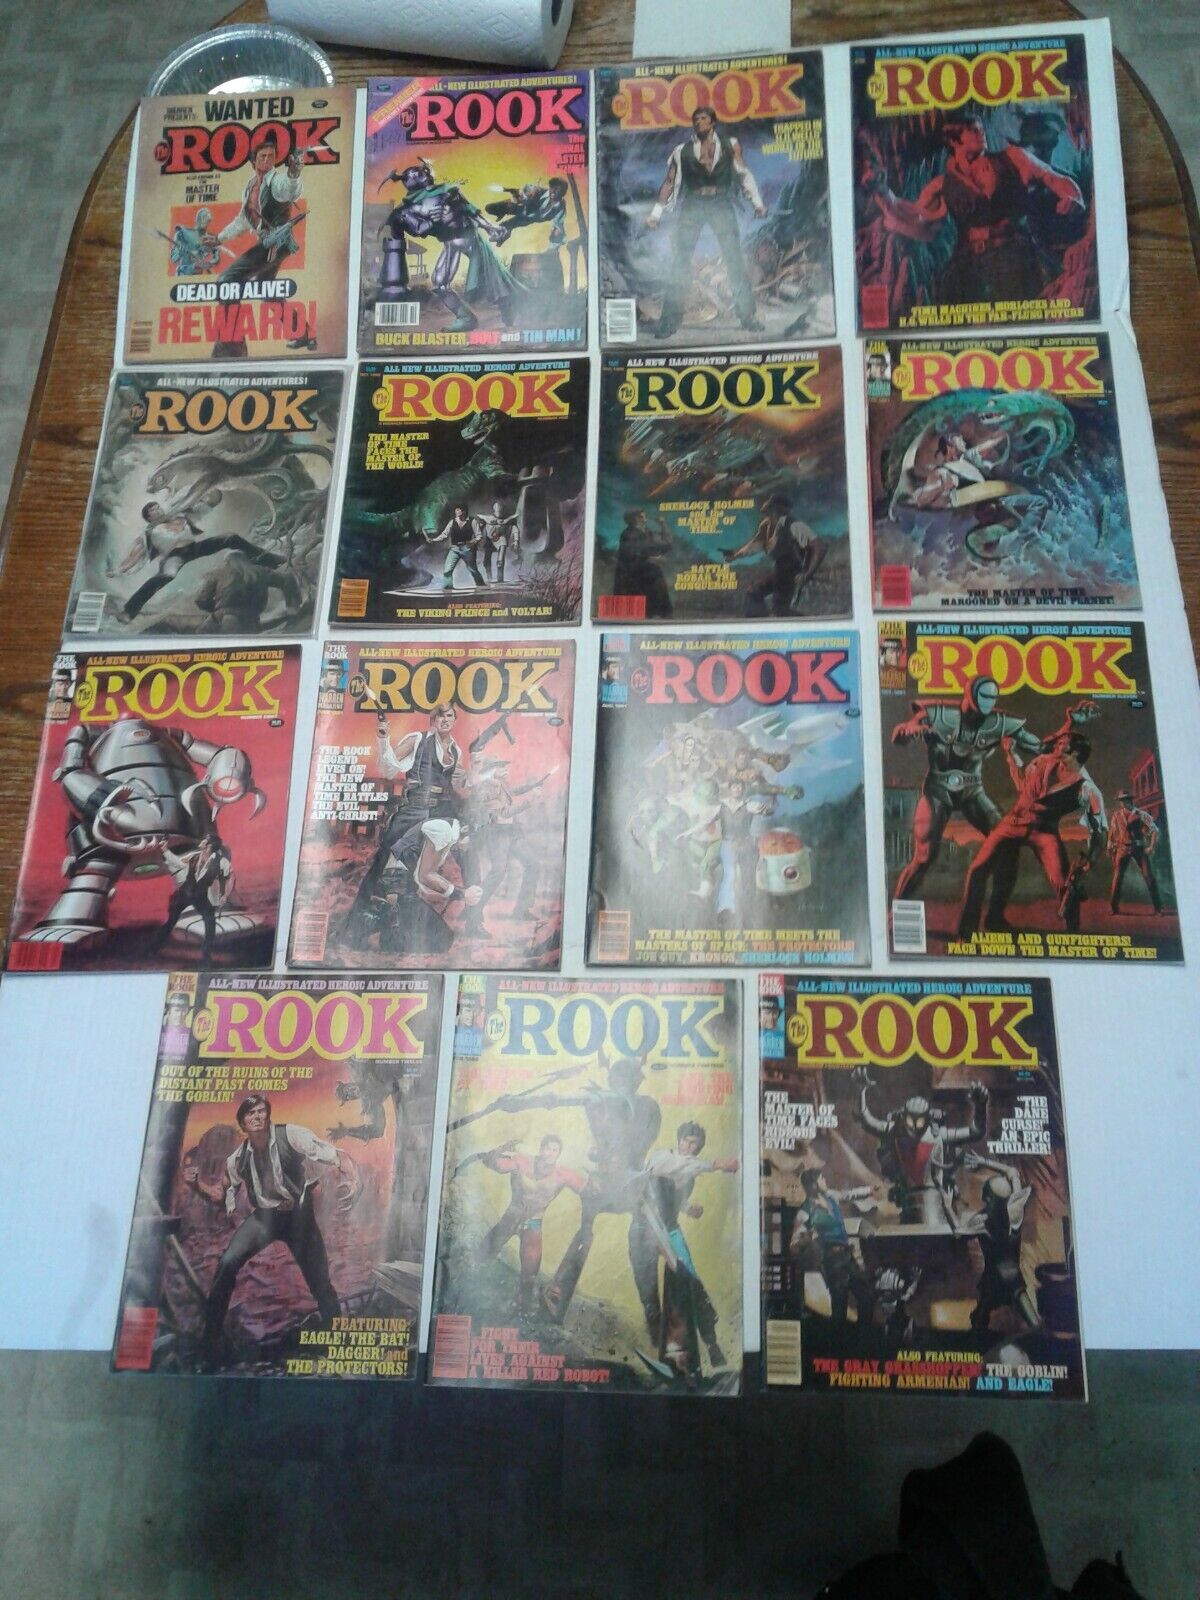 THE ROOK MAGAZINE (Complete series)all 14 issues plus(wanted the rook)